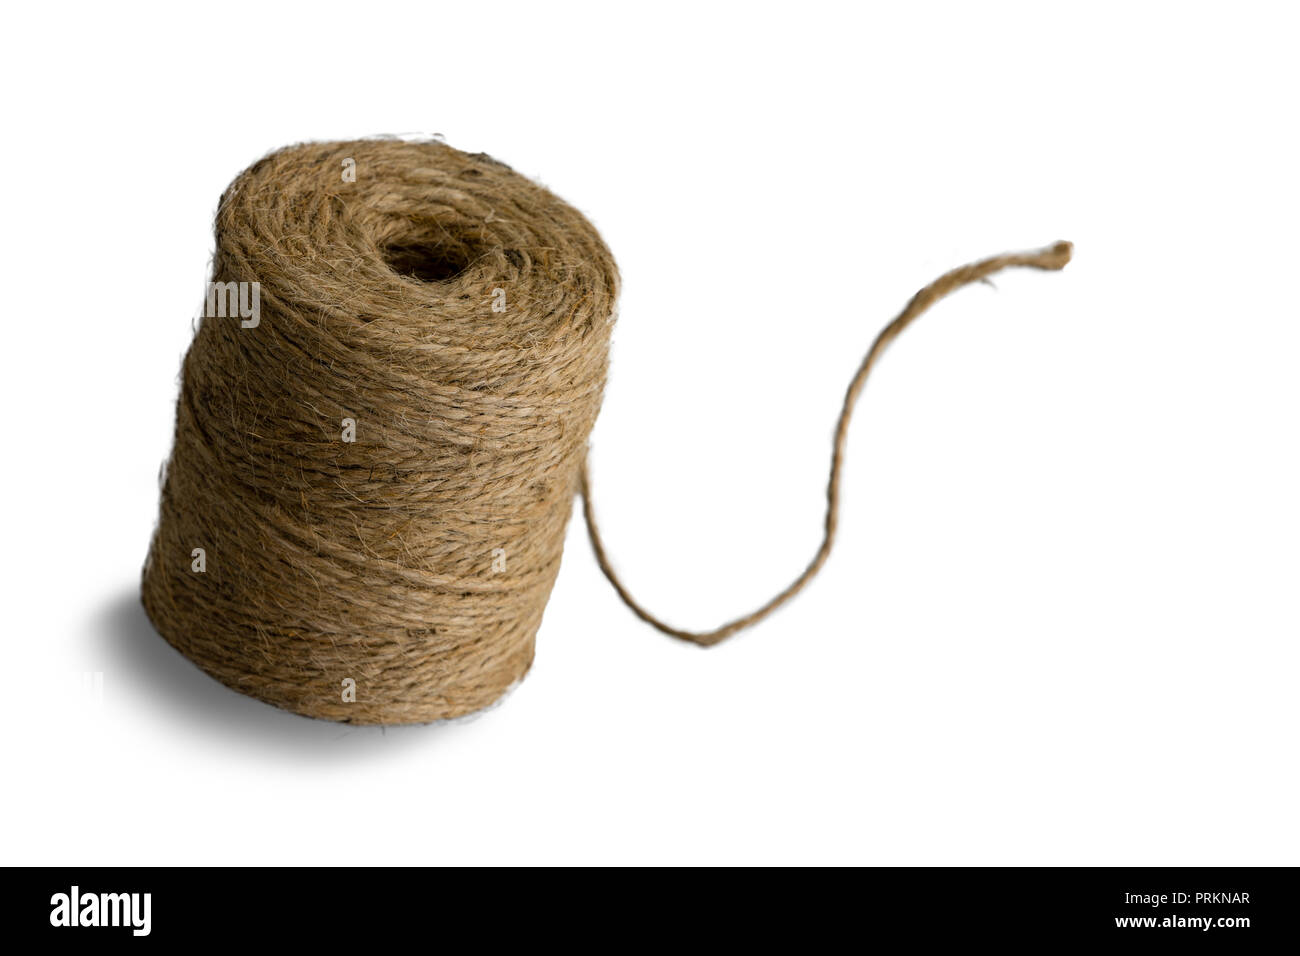 https://c8.alamy.com/comp/PRKNAR/one-cylindrical-isolated-coil-of-interwoven-brown-heavy-duty-string-with-shadow-over-plain-white-background-PRKNAR.jpg